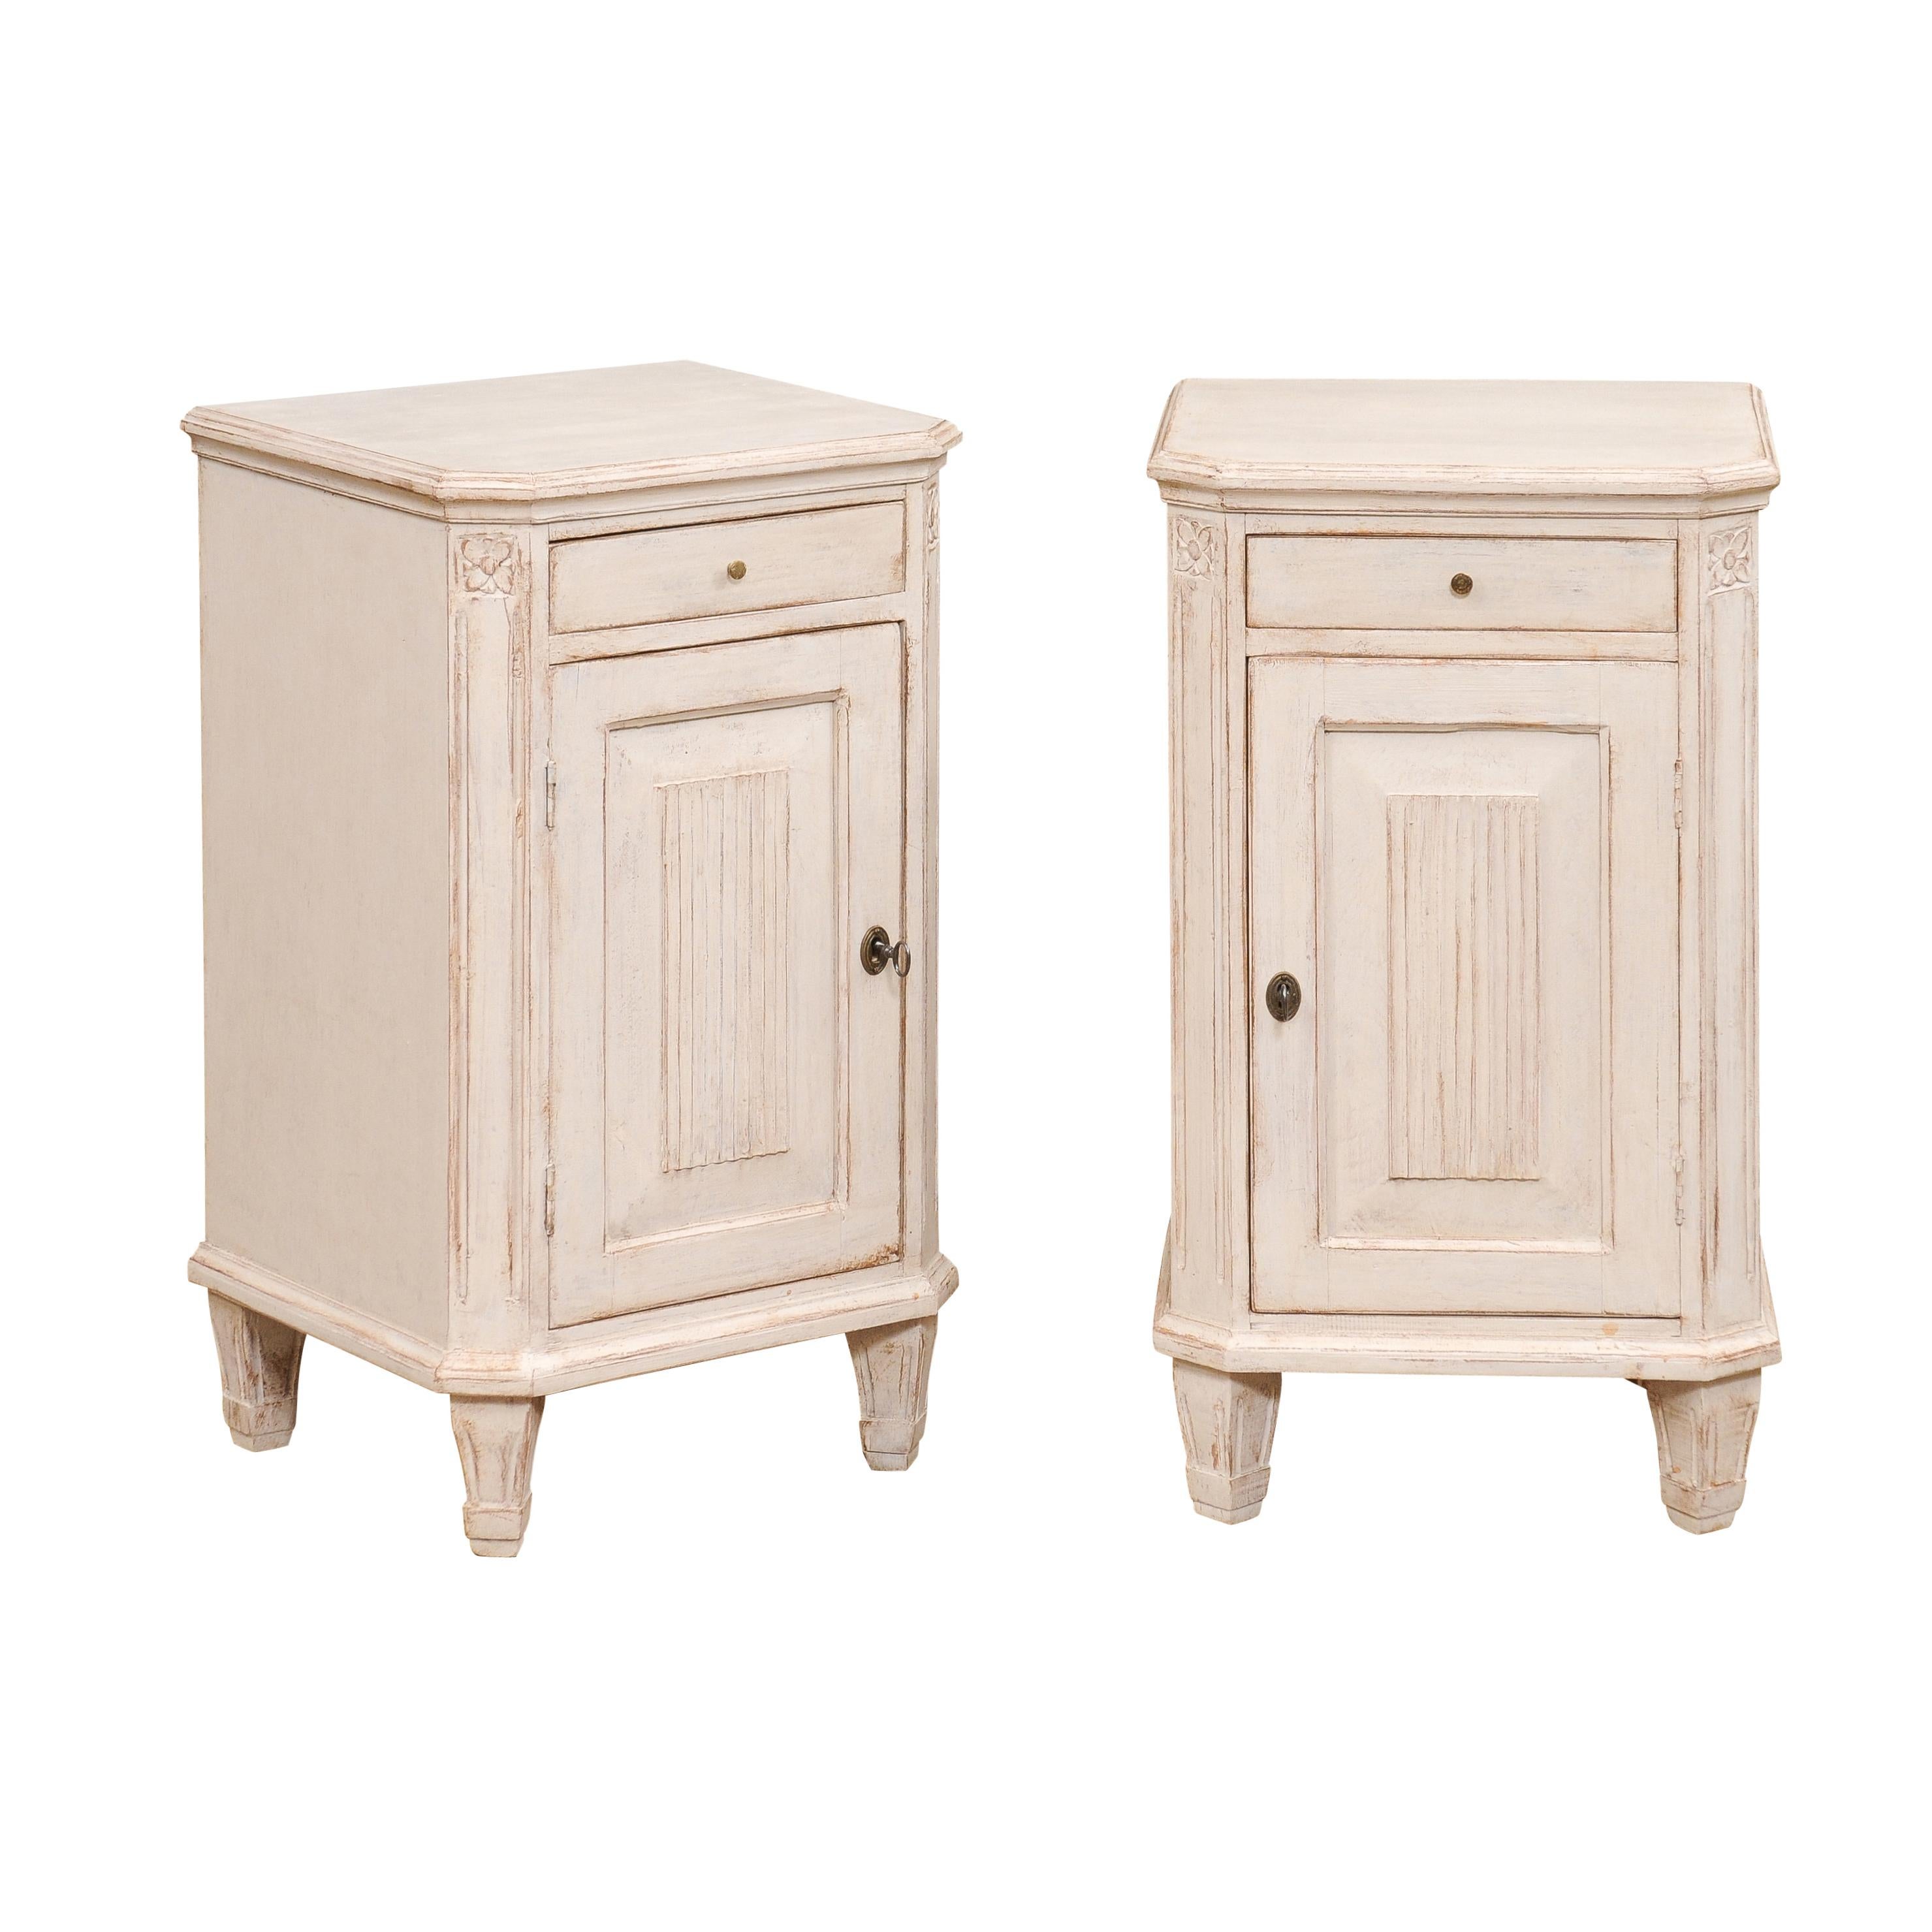 A pair of Swedish Gustavian style painted wood nightstand tables from the 19th century with single drawers and doors, carved fluted motifs, canted side posts, carved rosettes. Add a touch of Swedish Gustavian elegance to your bedroom with this pair